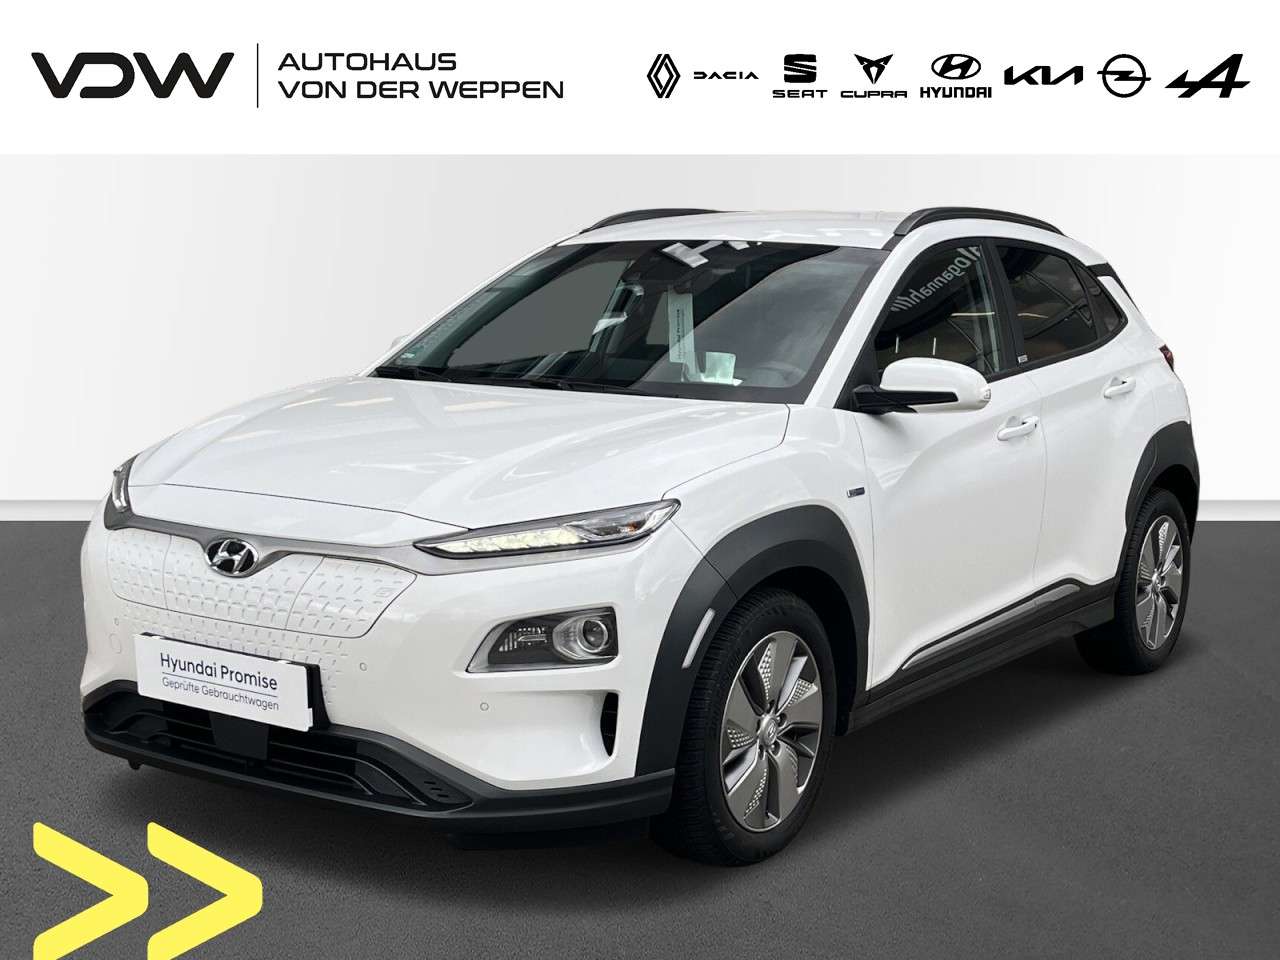 Hyundai KONA Off-Road/Pick-up in White used in Waiblingen for € 33,700.-